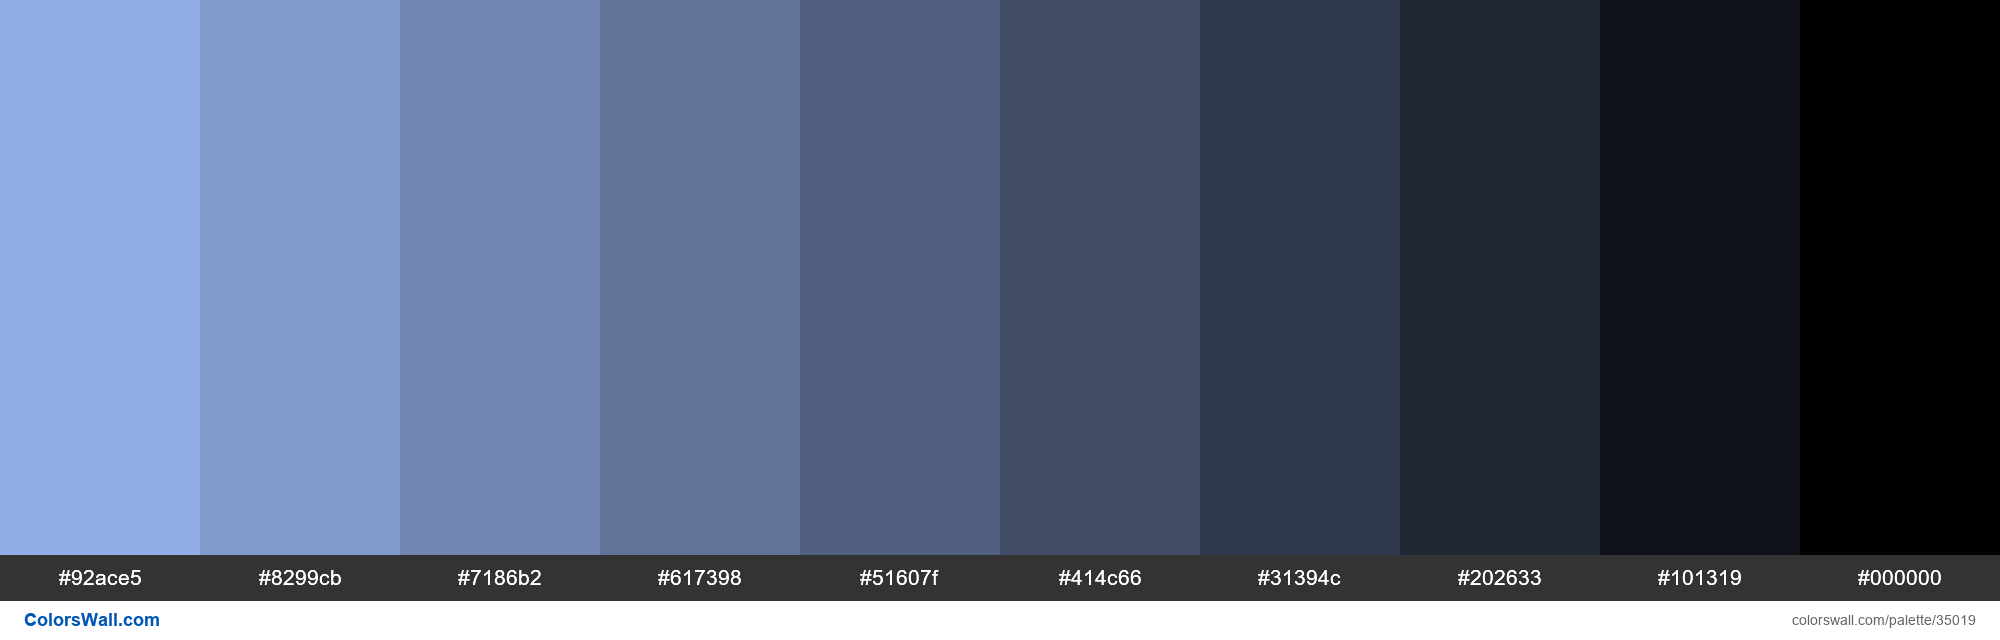 Shades Xkcd Color Pastel Blue bffe Hex Hex Rgb Codes